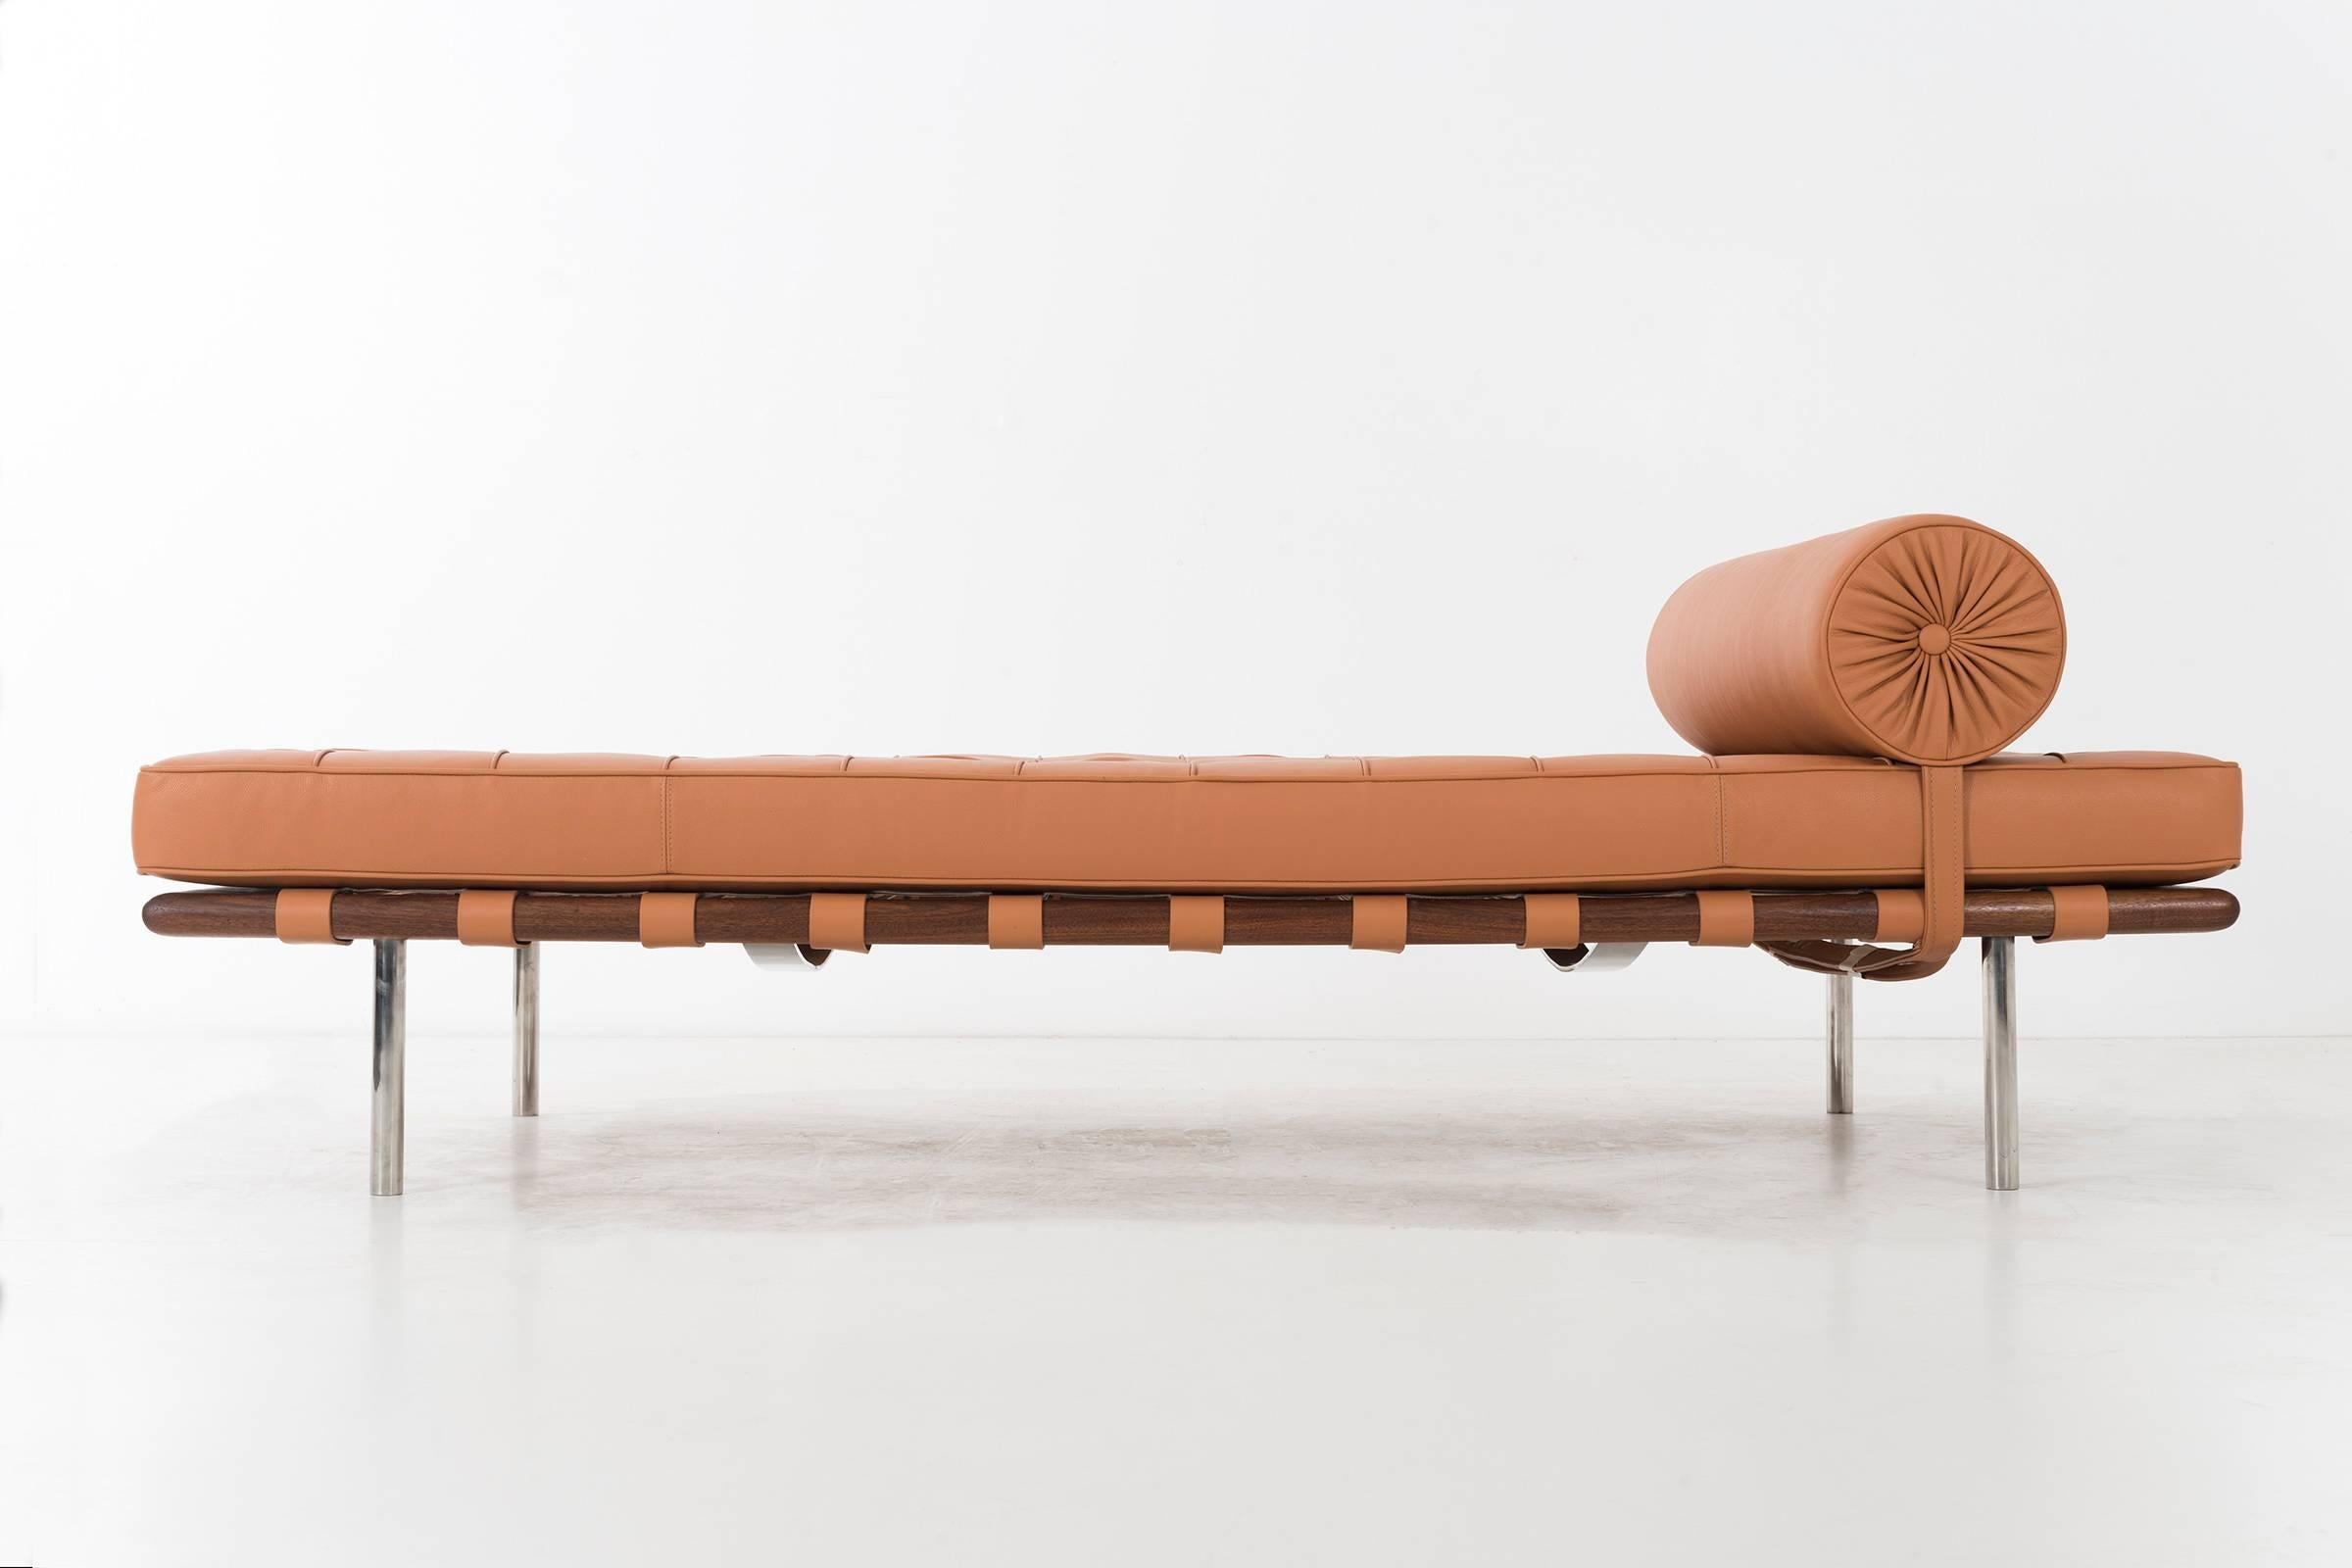 Classic Mies Daybed in solid oiled walnut with reupholstered cushion and pillow in Spinneybeck leather.

Retains Knoll International label on the underside of frame.
4 matching Tugendhat Chairs shown on separate listing.

